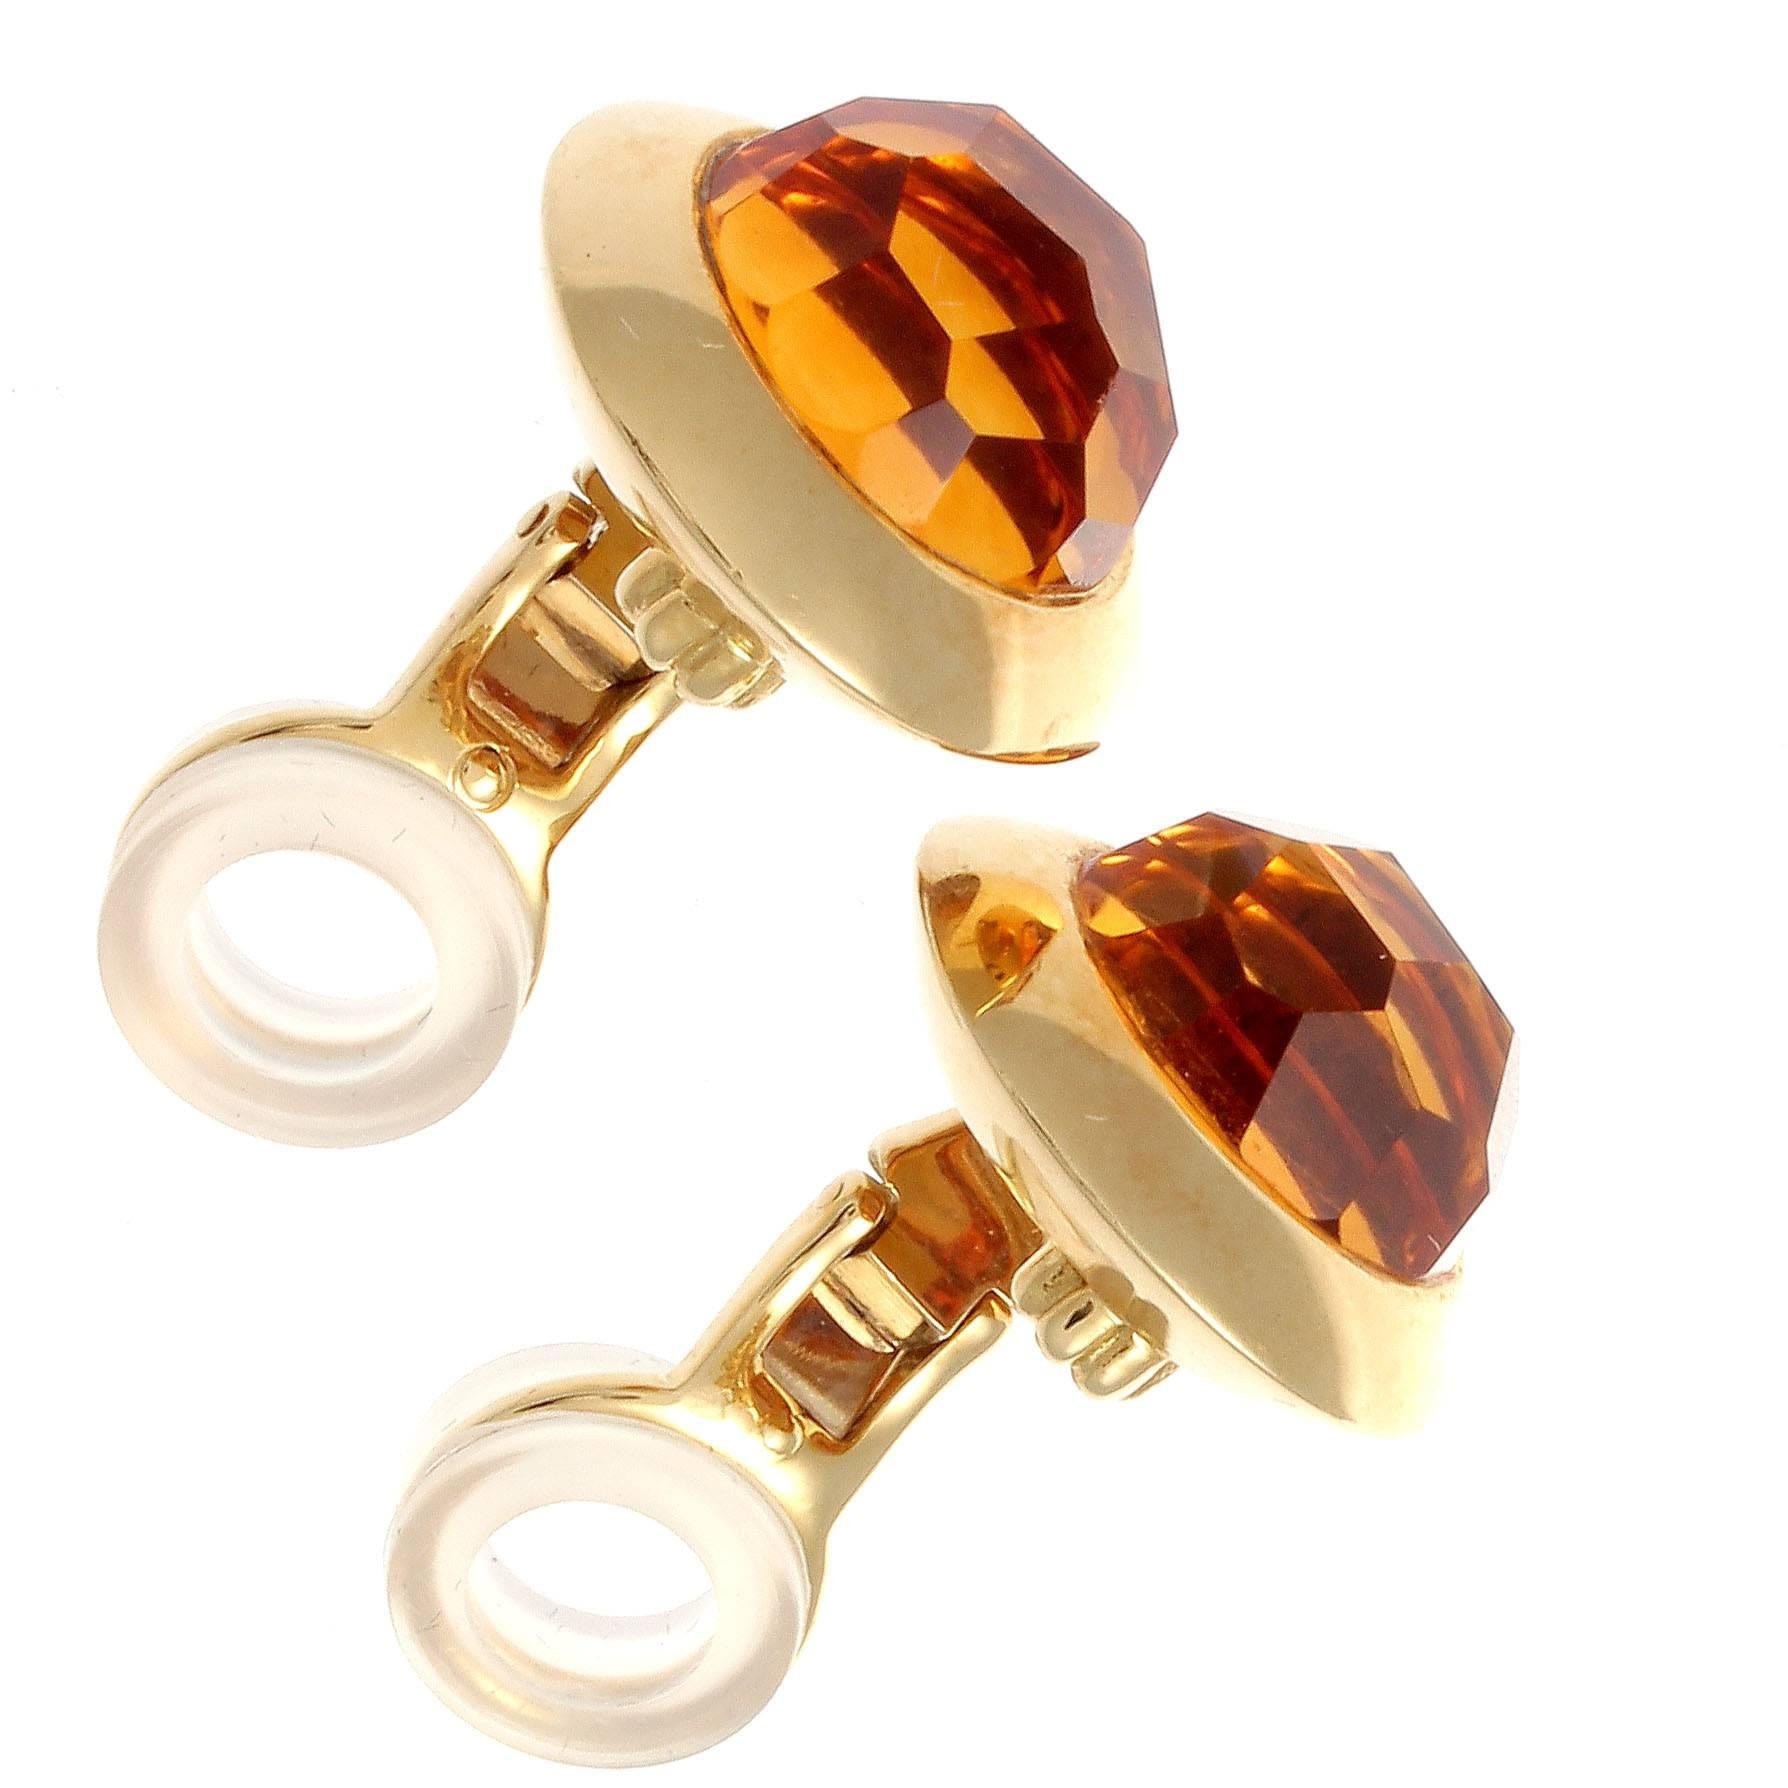 An innovative design from the Italian house of Pomellato. Featuring lively  faceted cabochon cut citrine's that are surrounded by the familiar Pomellato 18k yellow gold mixture. Signed Pomellato.